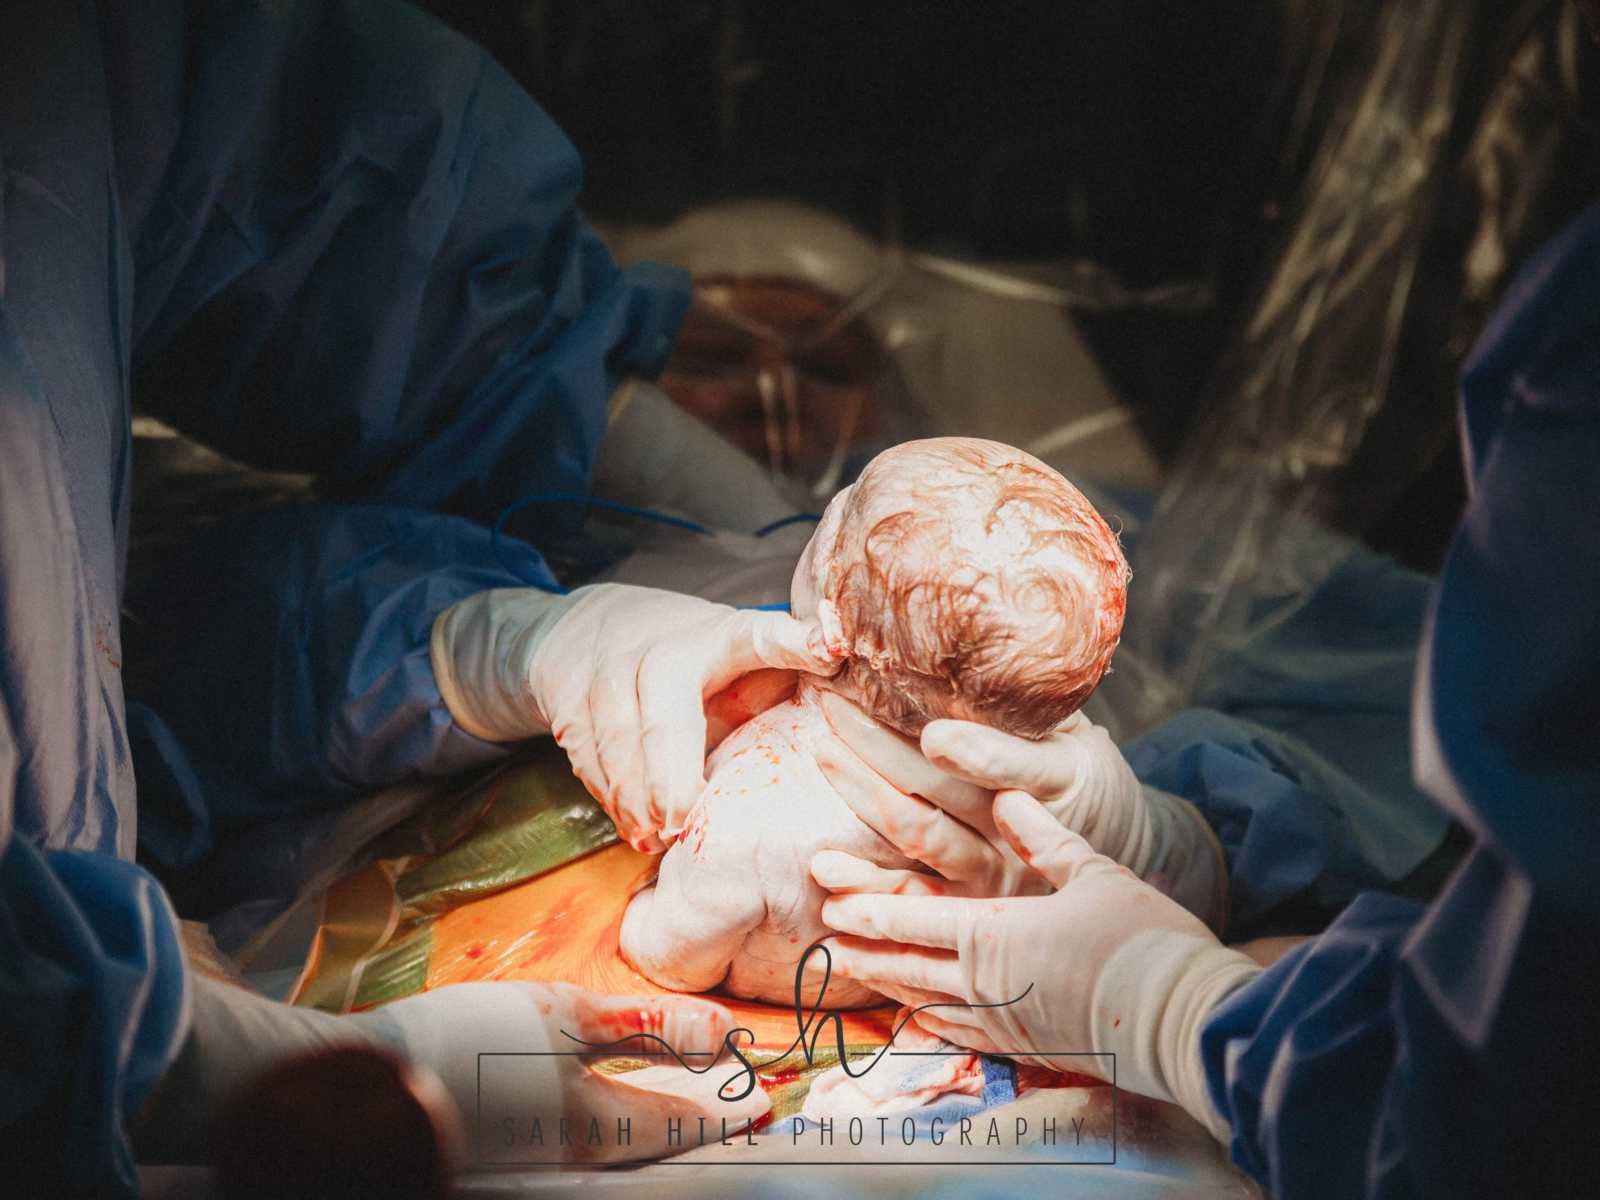 OBGYN performs c-section and she and mother who is also a midwife pull baby out together